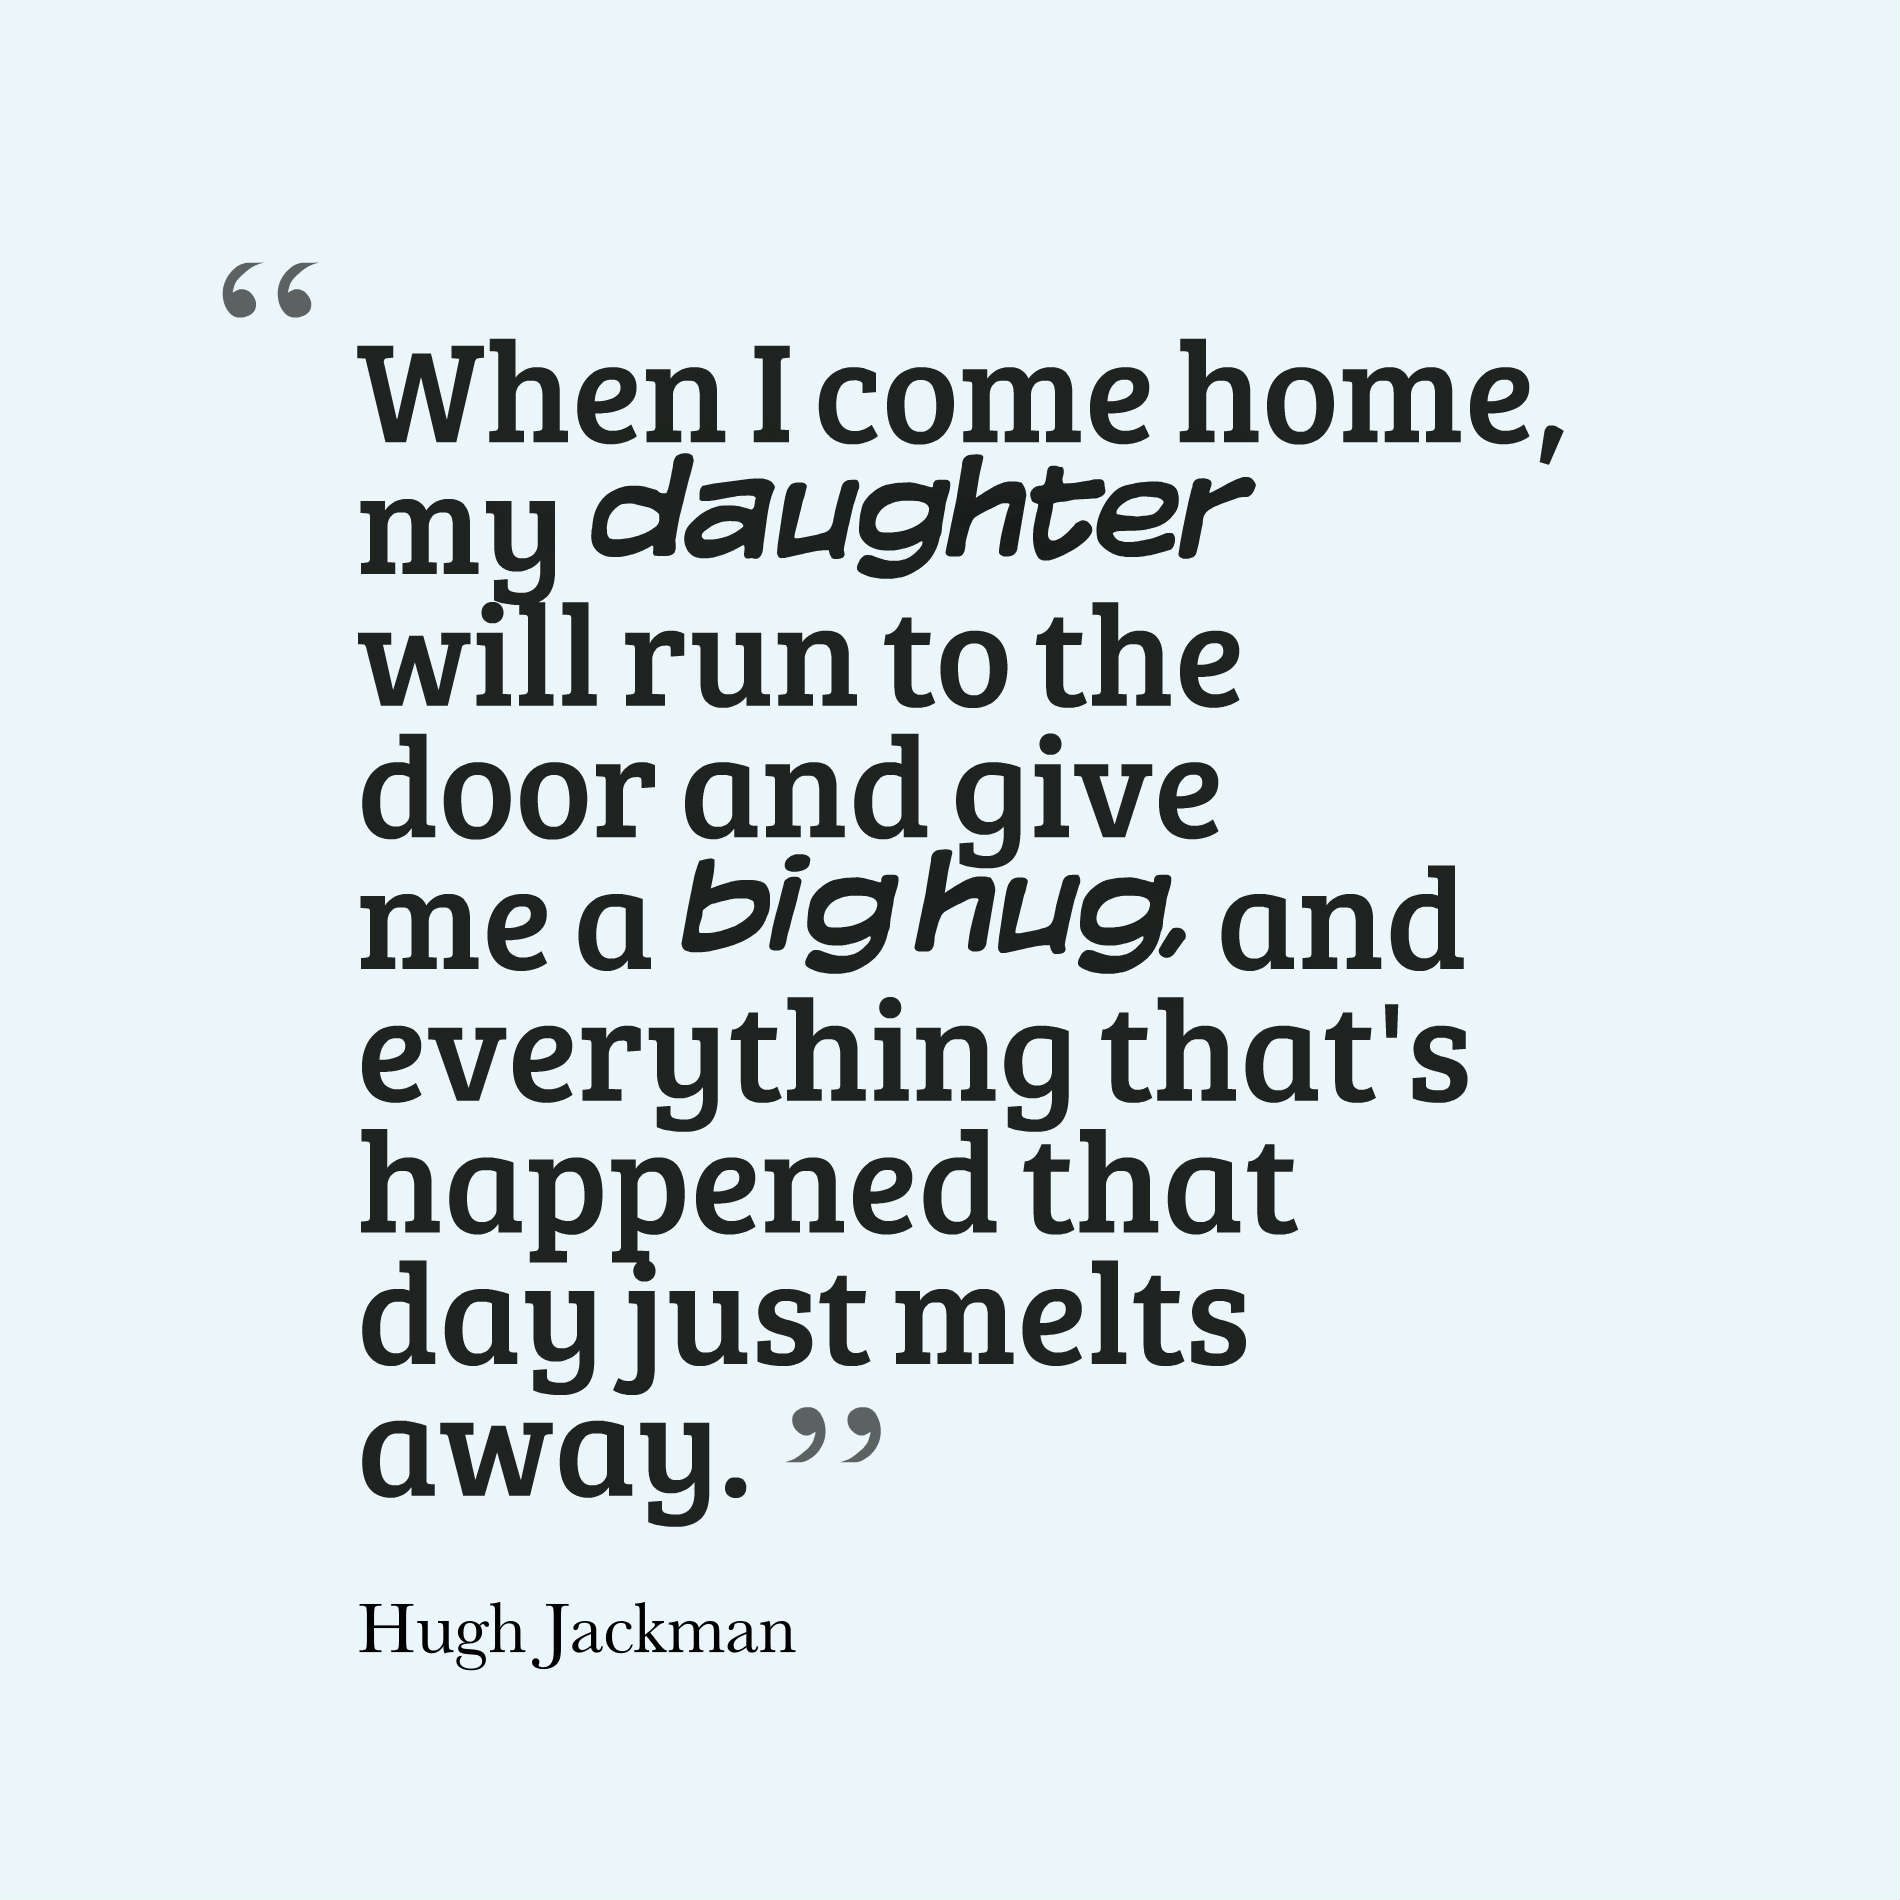 When I come home, my daughter will run to the door and give me a big hug